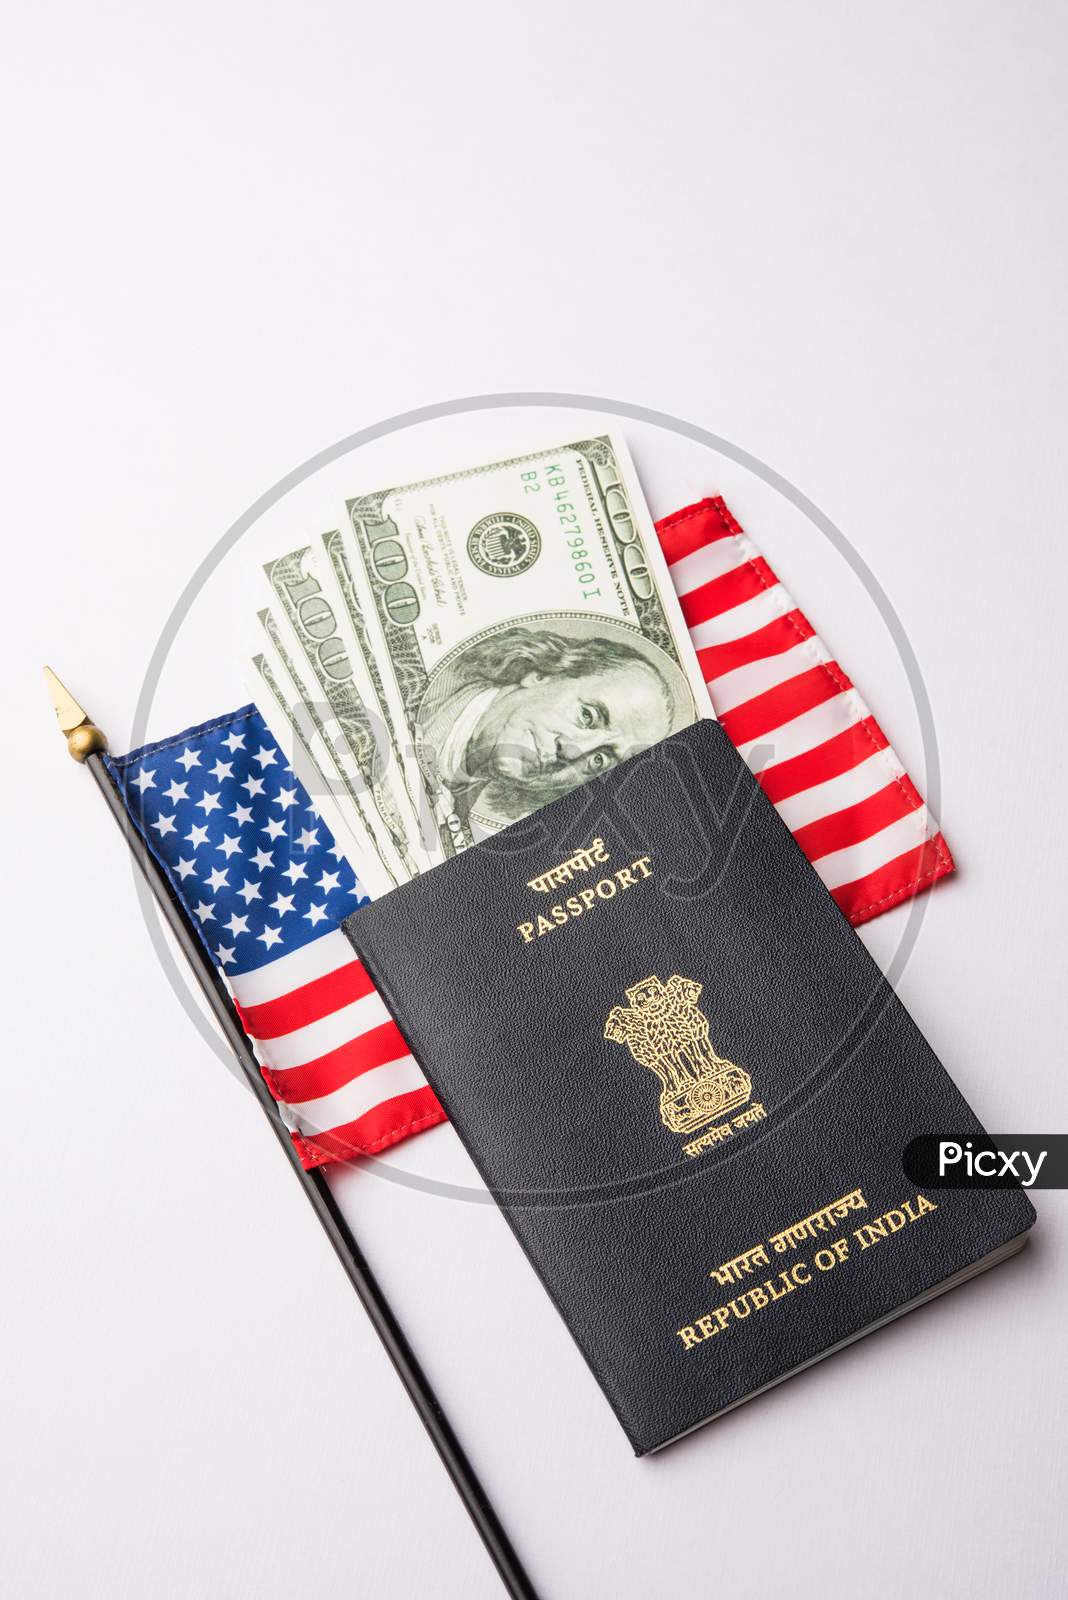 Indian passport with US Dollars with american flag in the background, Concept showing applying for tourist or H-1B visa